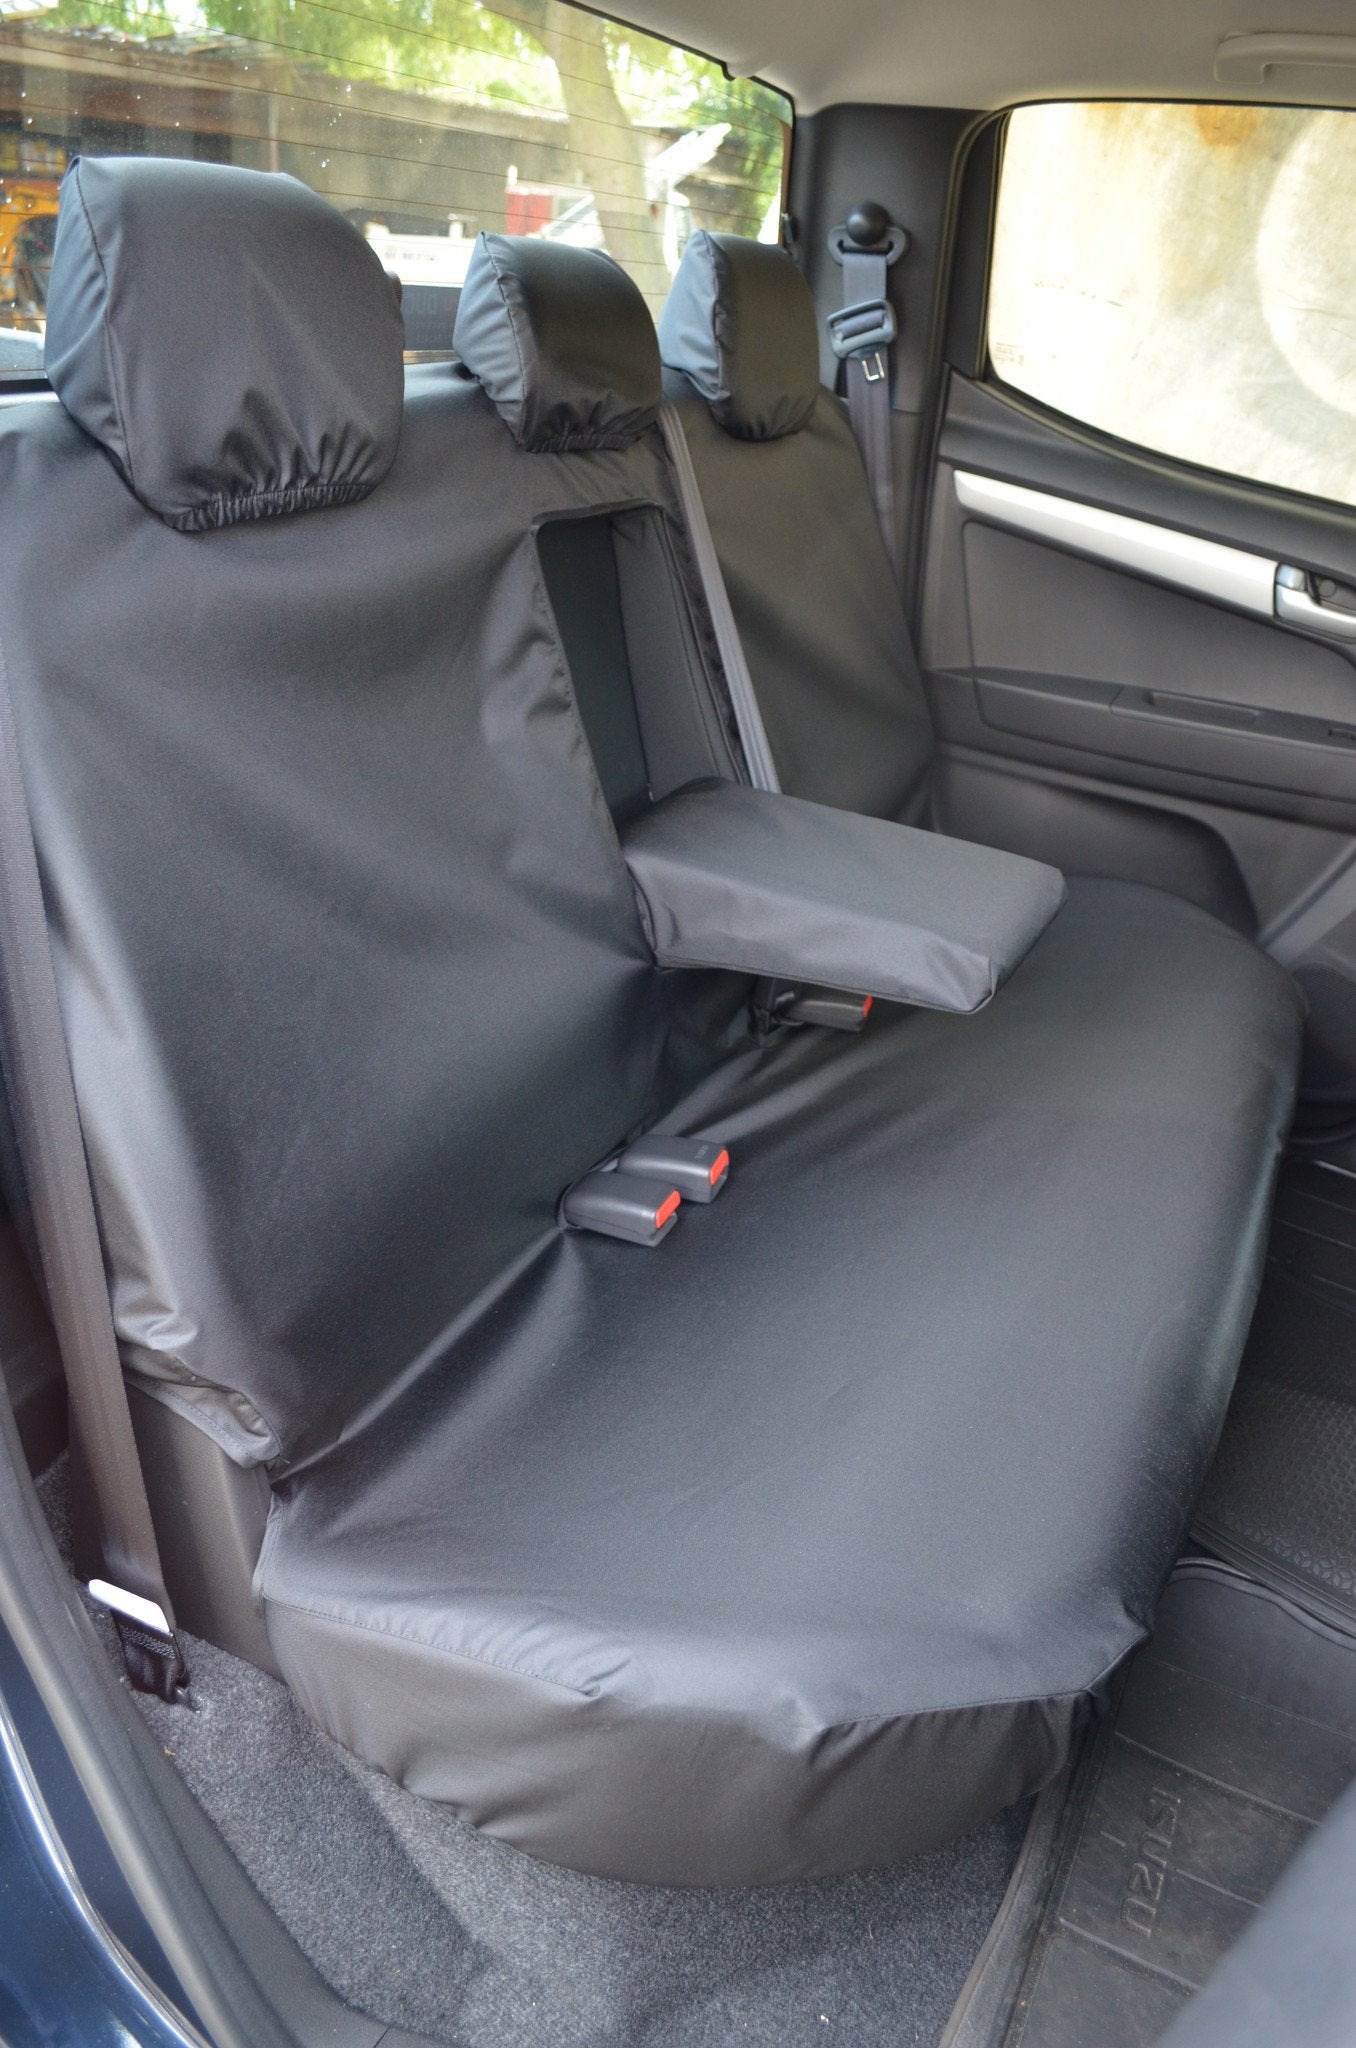 Isuzu D-Max 2012 Onwards Seat Covers Rear Seat Cover with Central Armrest / Black Turtle Covers Ltd